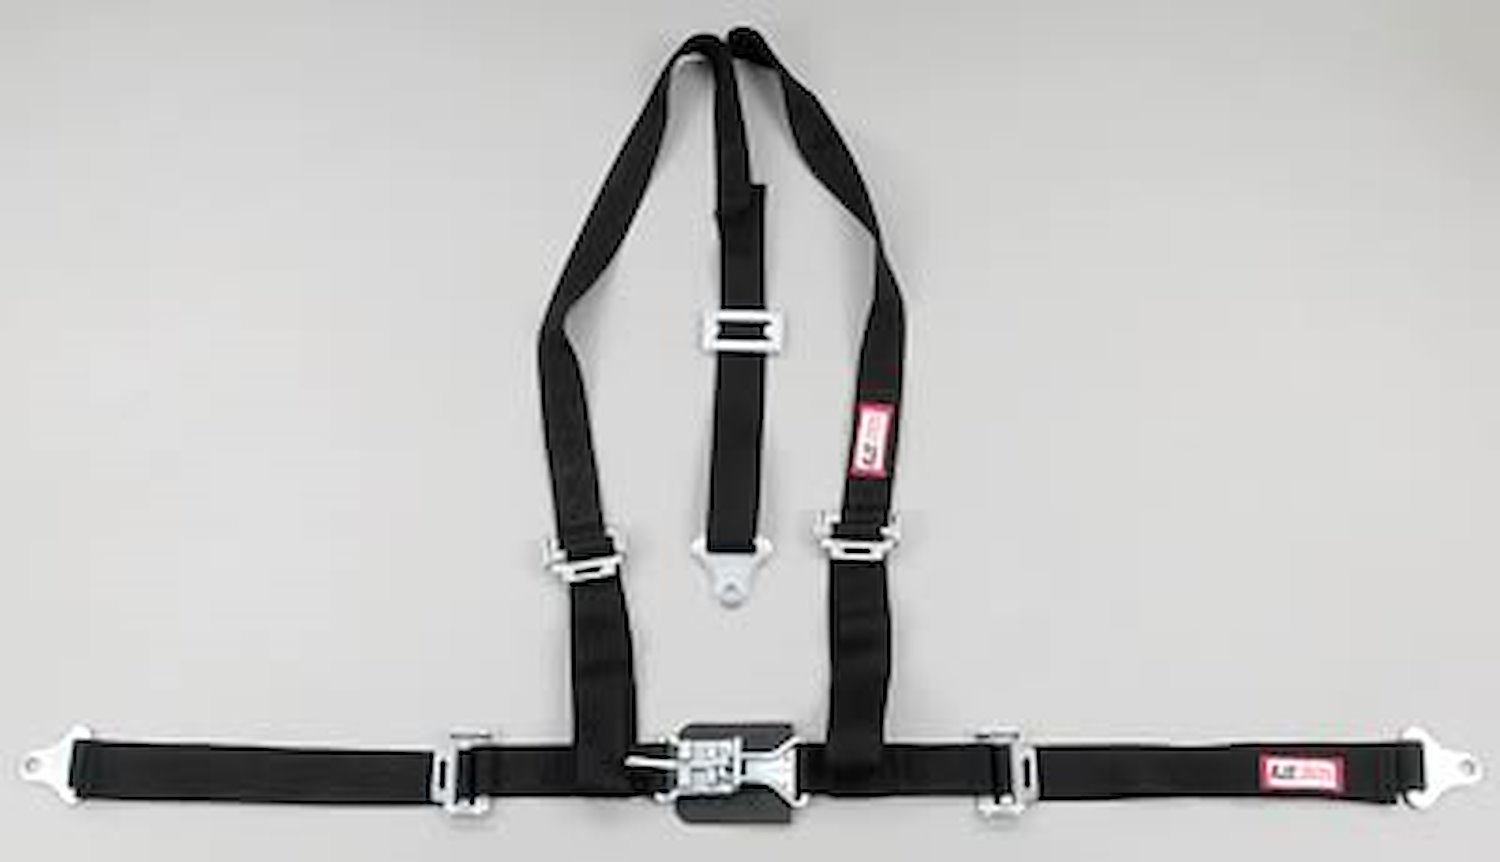 NON-SFI L&L HARNESS 3 PULL UP Lap BELT SNAP SEWN IN 2 S.H. Y FLOOR Mount WRAP/BOLT GRAY